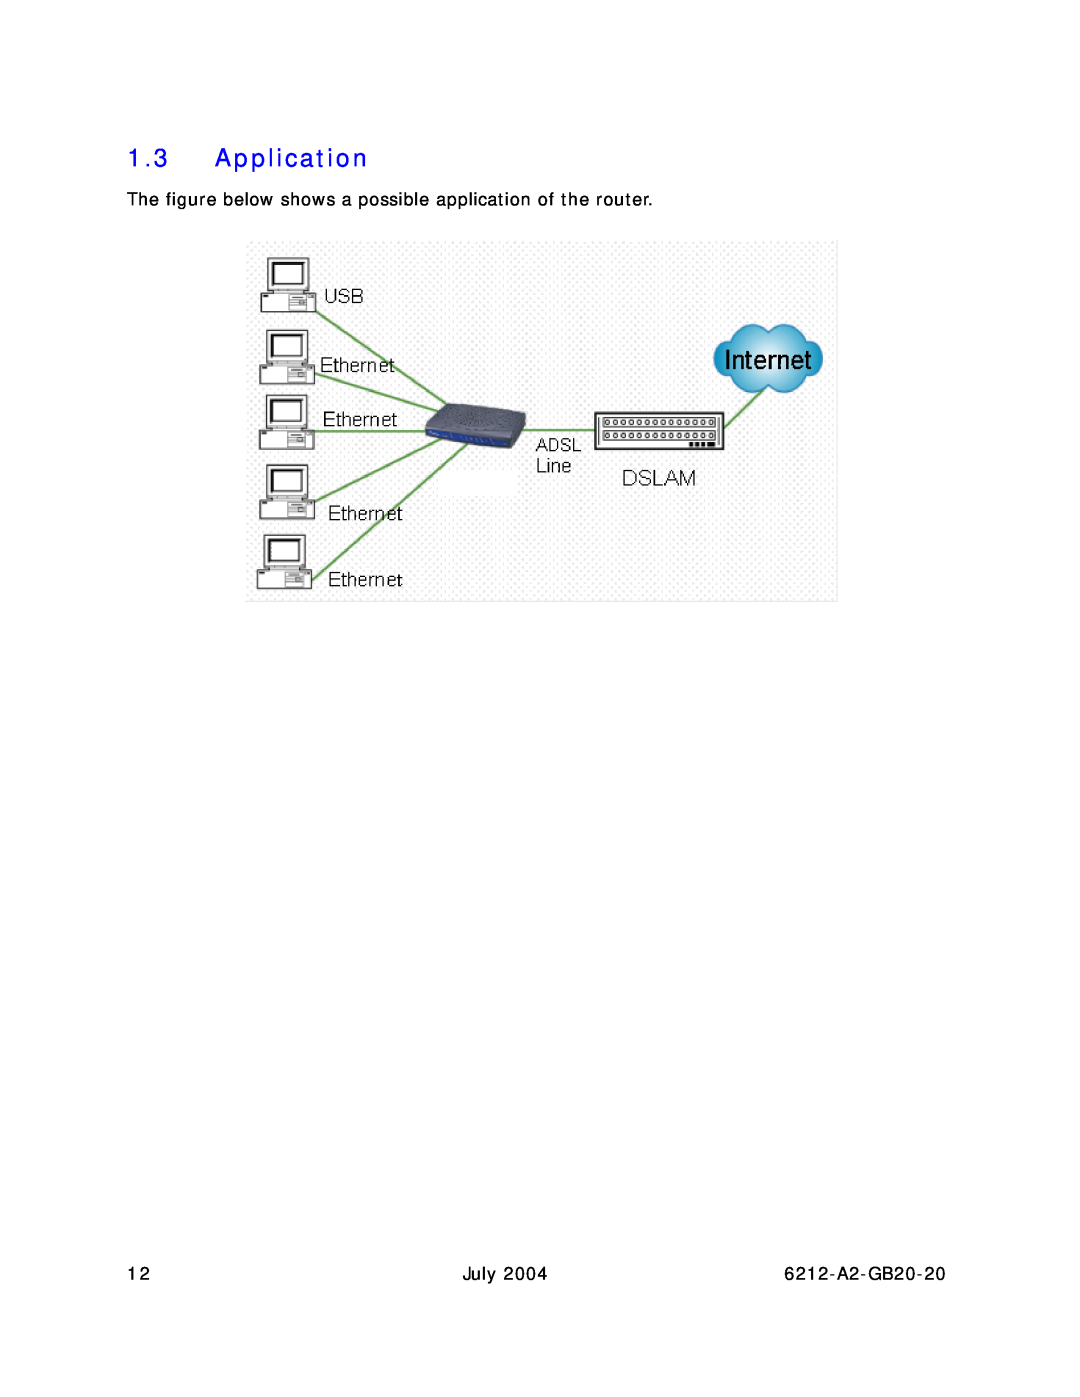 Paradyne manual Application, The figure below shows a possible application of the router, July, 6212-A2-GB20-20 